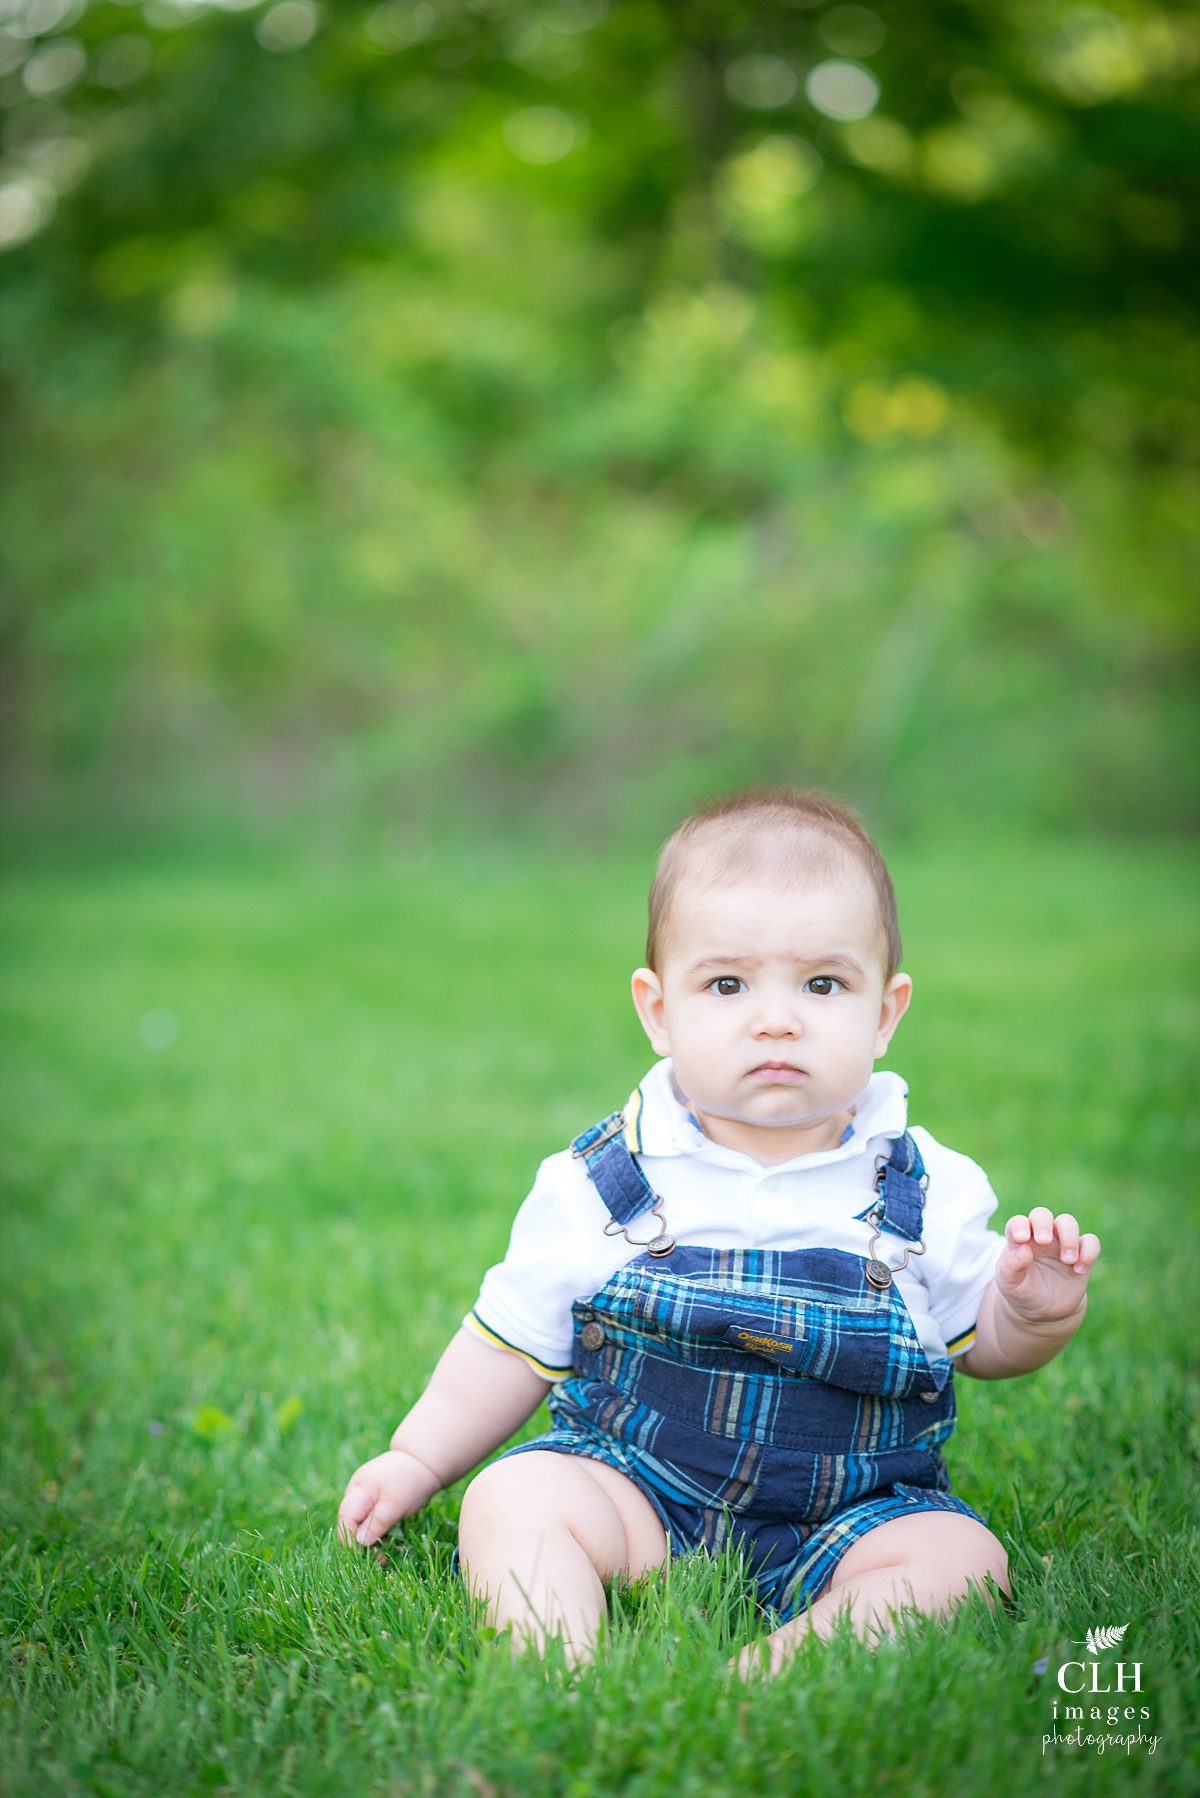 CLH images Photography - Family Photography - Family Photos - Pine Hollow Arboretum - Delmar New York - The Dufores (4)